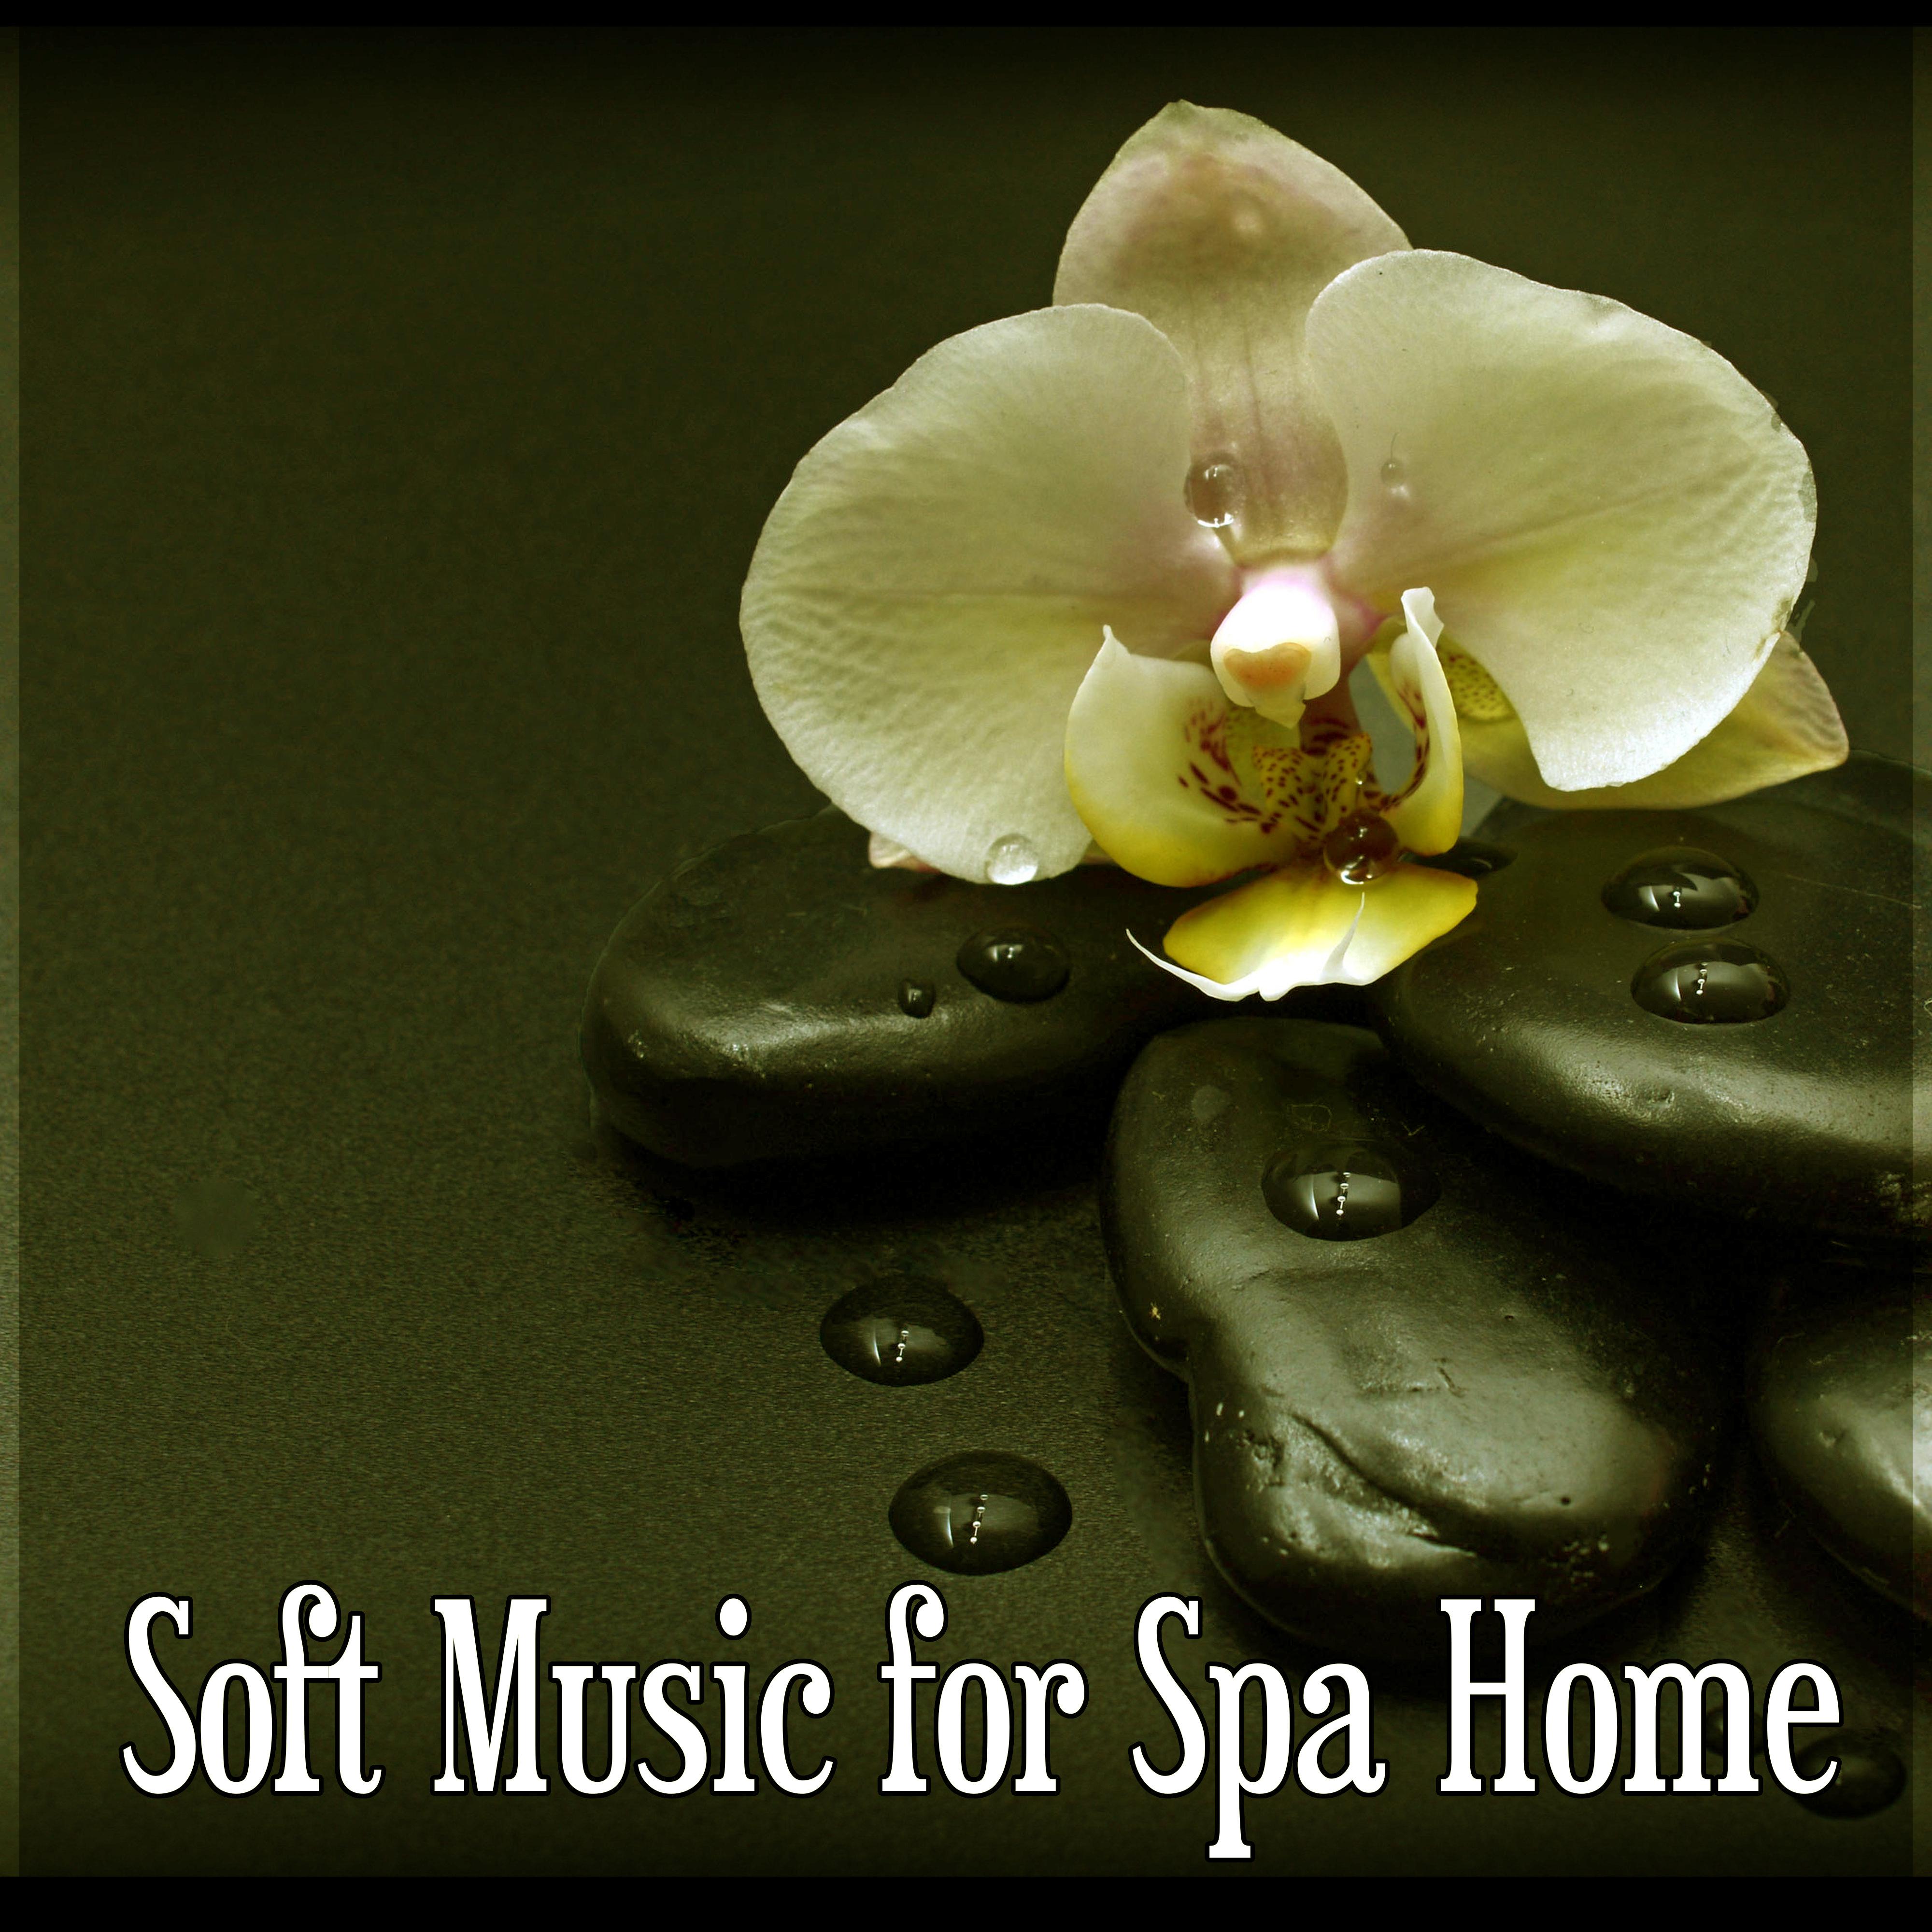 Soft Music for Spa Home – Calm Music for Massage, Healing Touch, Background Music for Relaxation, Deep Sounds for Meditation